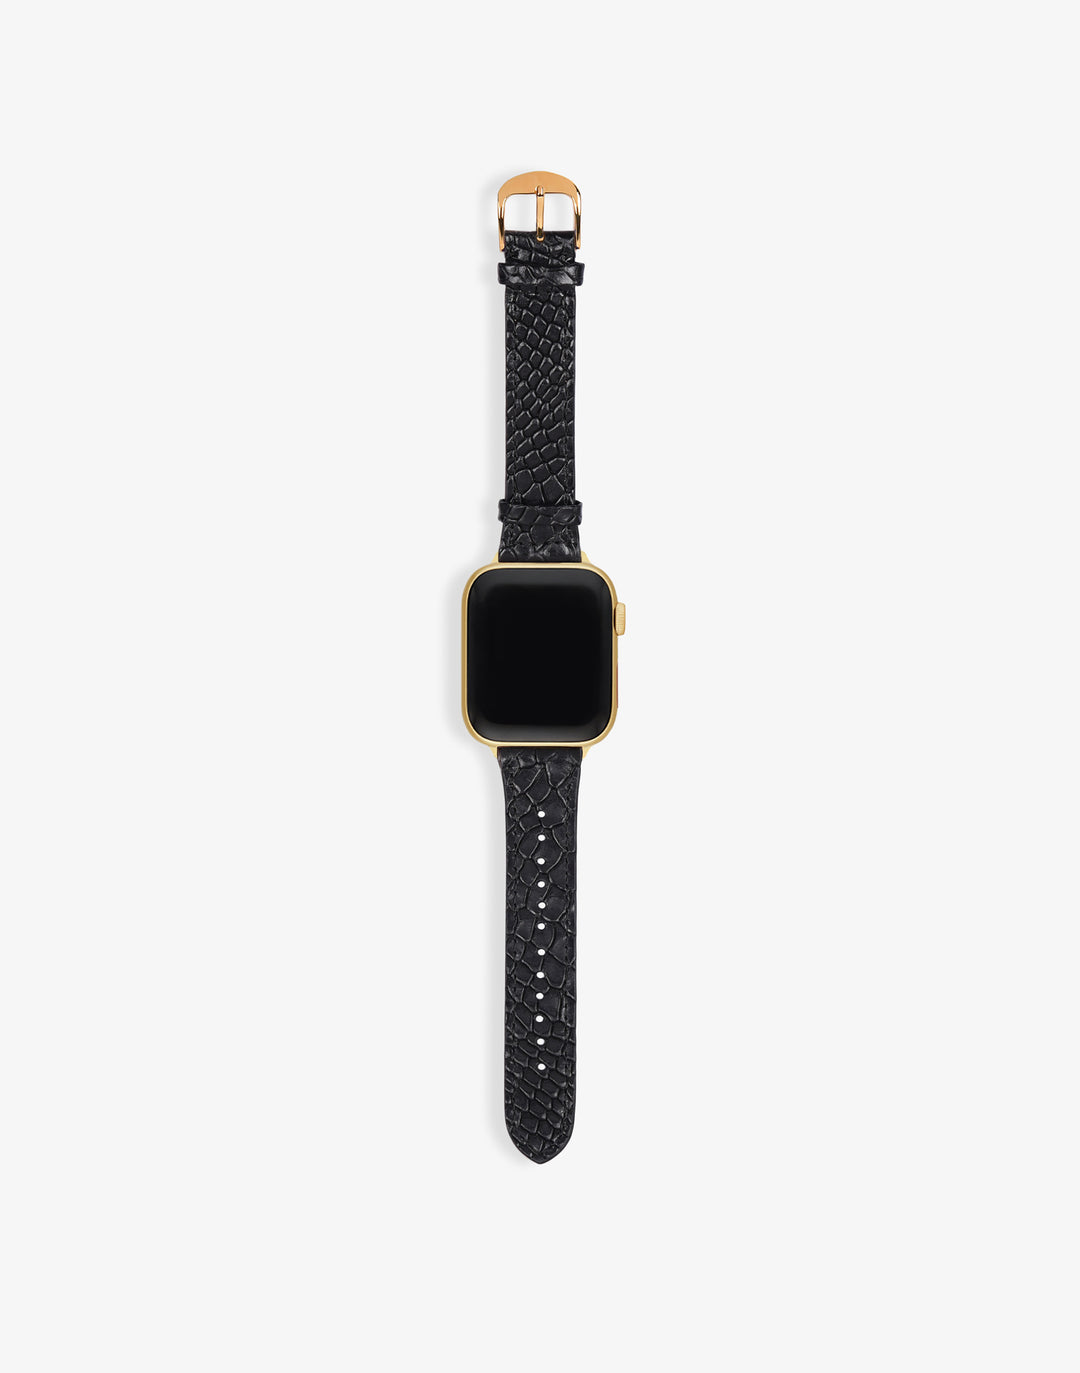 Hyer Goods recycled leather Apple Watch Band black lizard gold hardware#color_black-lizard